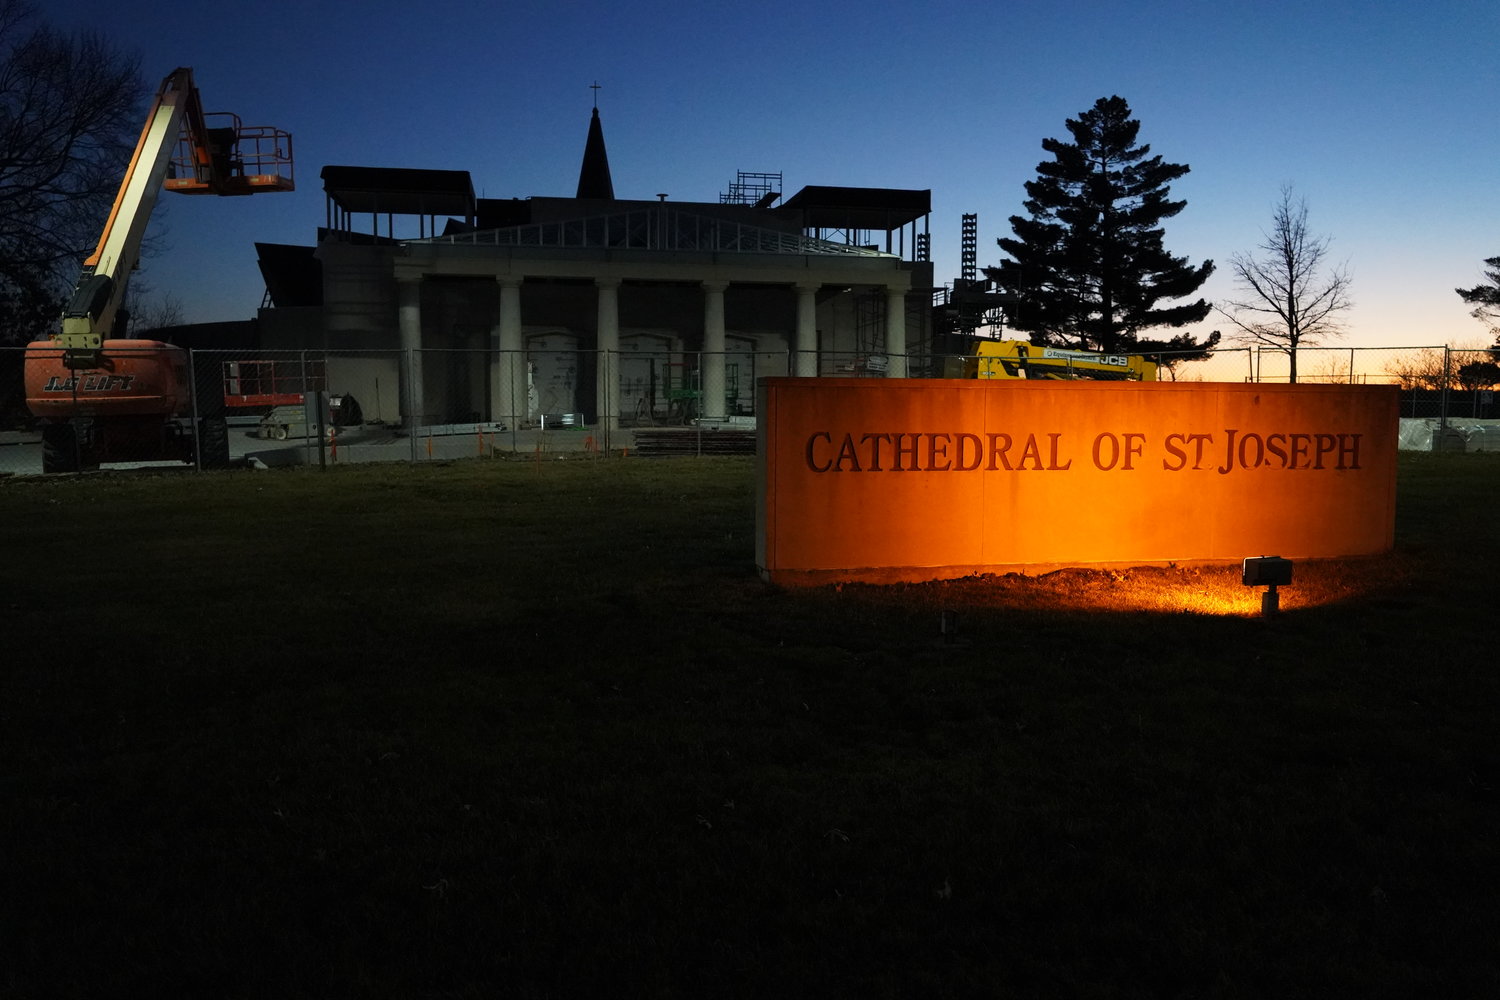 The Cathedral of St. Joseph is seen at sunset on Feb. 10, showing progress on its expanded narthex, bell towers and columned porte cochere, all designed to help provide a more dignified, more welcoming environment for the Cathedral. Bishop W. Shawn McKnight has set May 5 as the rededication date for the Cathedral, following an 16-month renovation and renewal.